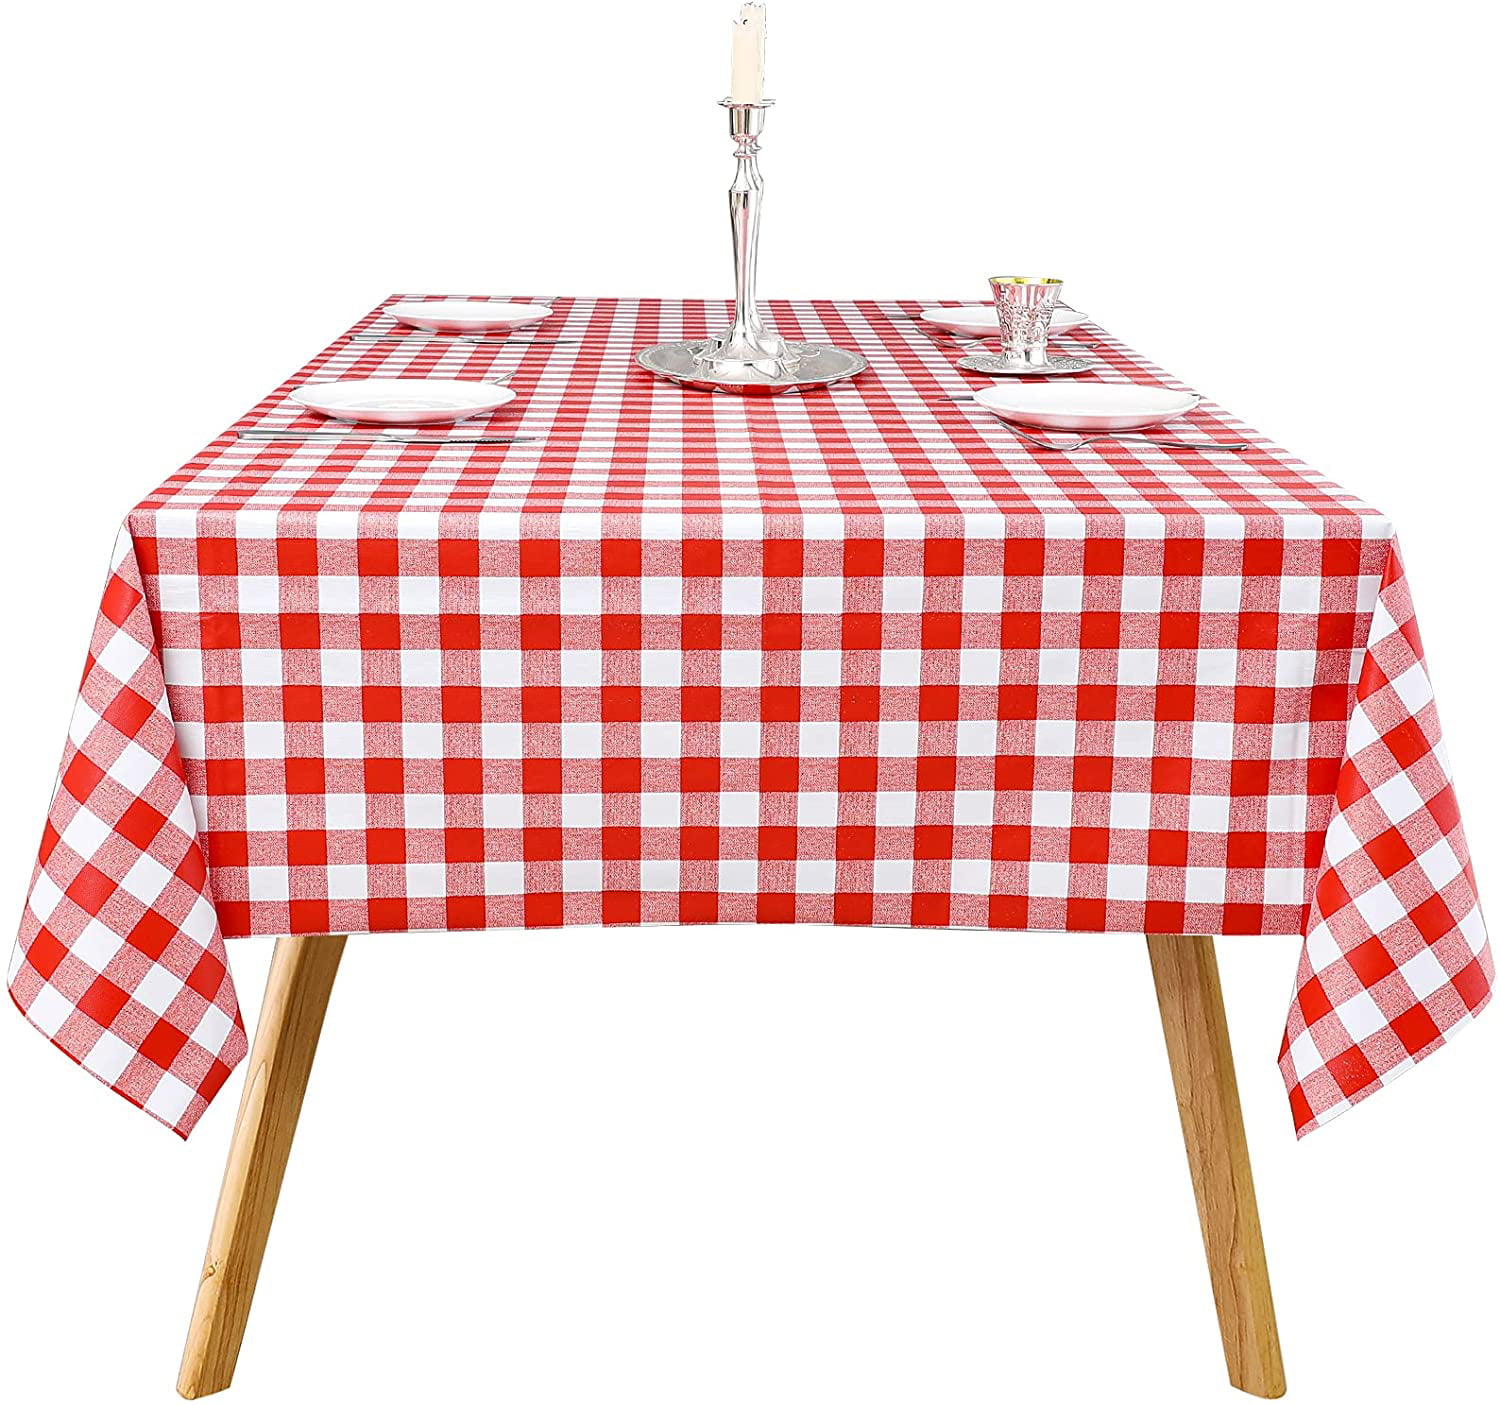 One Bear Panda Rectangle Tablecloth Christmas Cute Panda Eat Bamboo Leaf Pink Table Cloth Polyester Washable Square Round Table Cover for Picnic Dinner Party 54x72 Inch